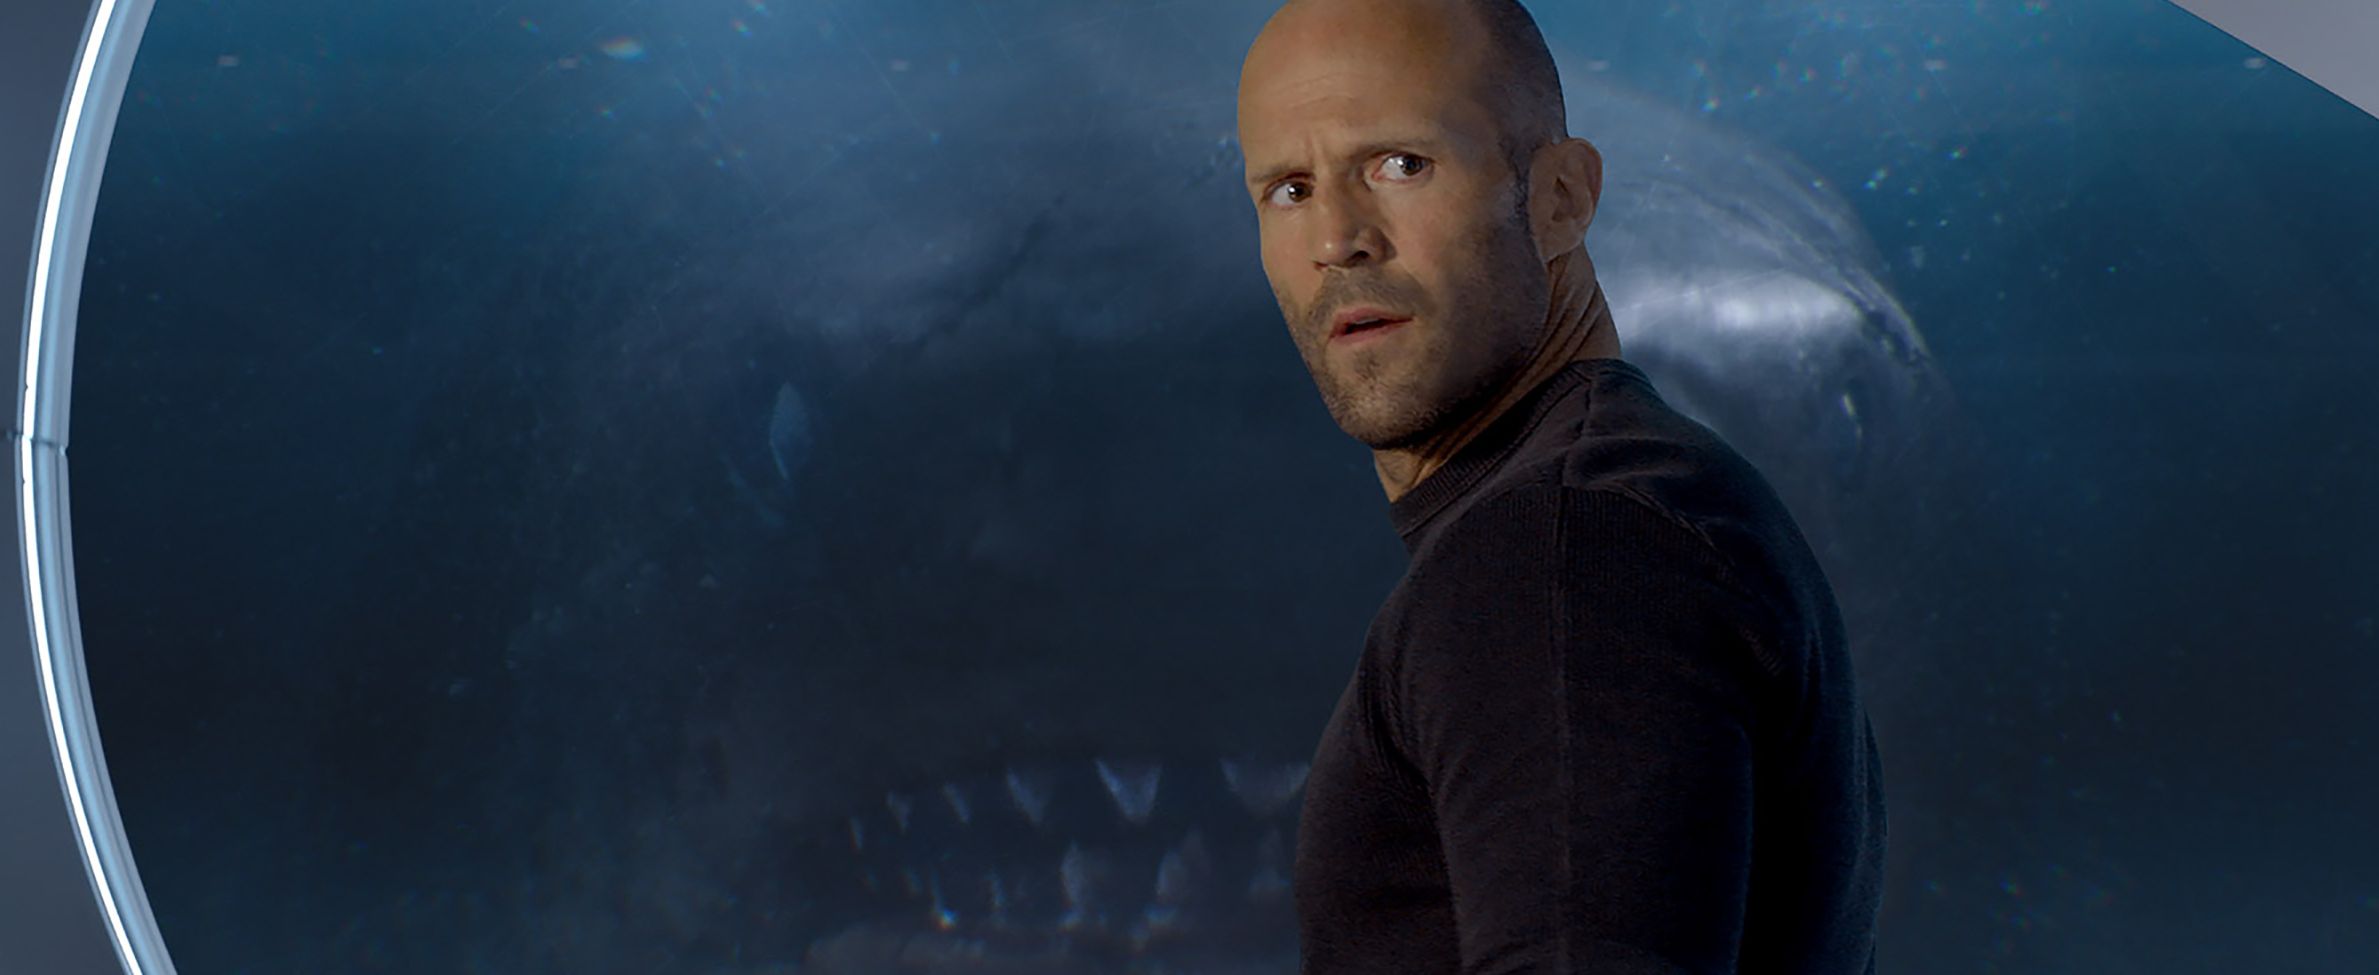 Anything is possible with Jason Statham in it.